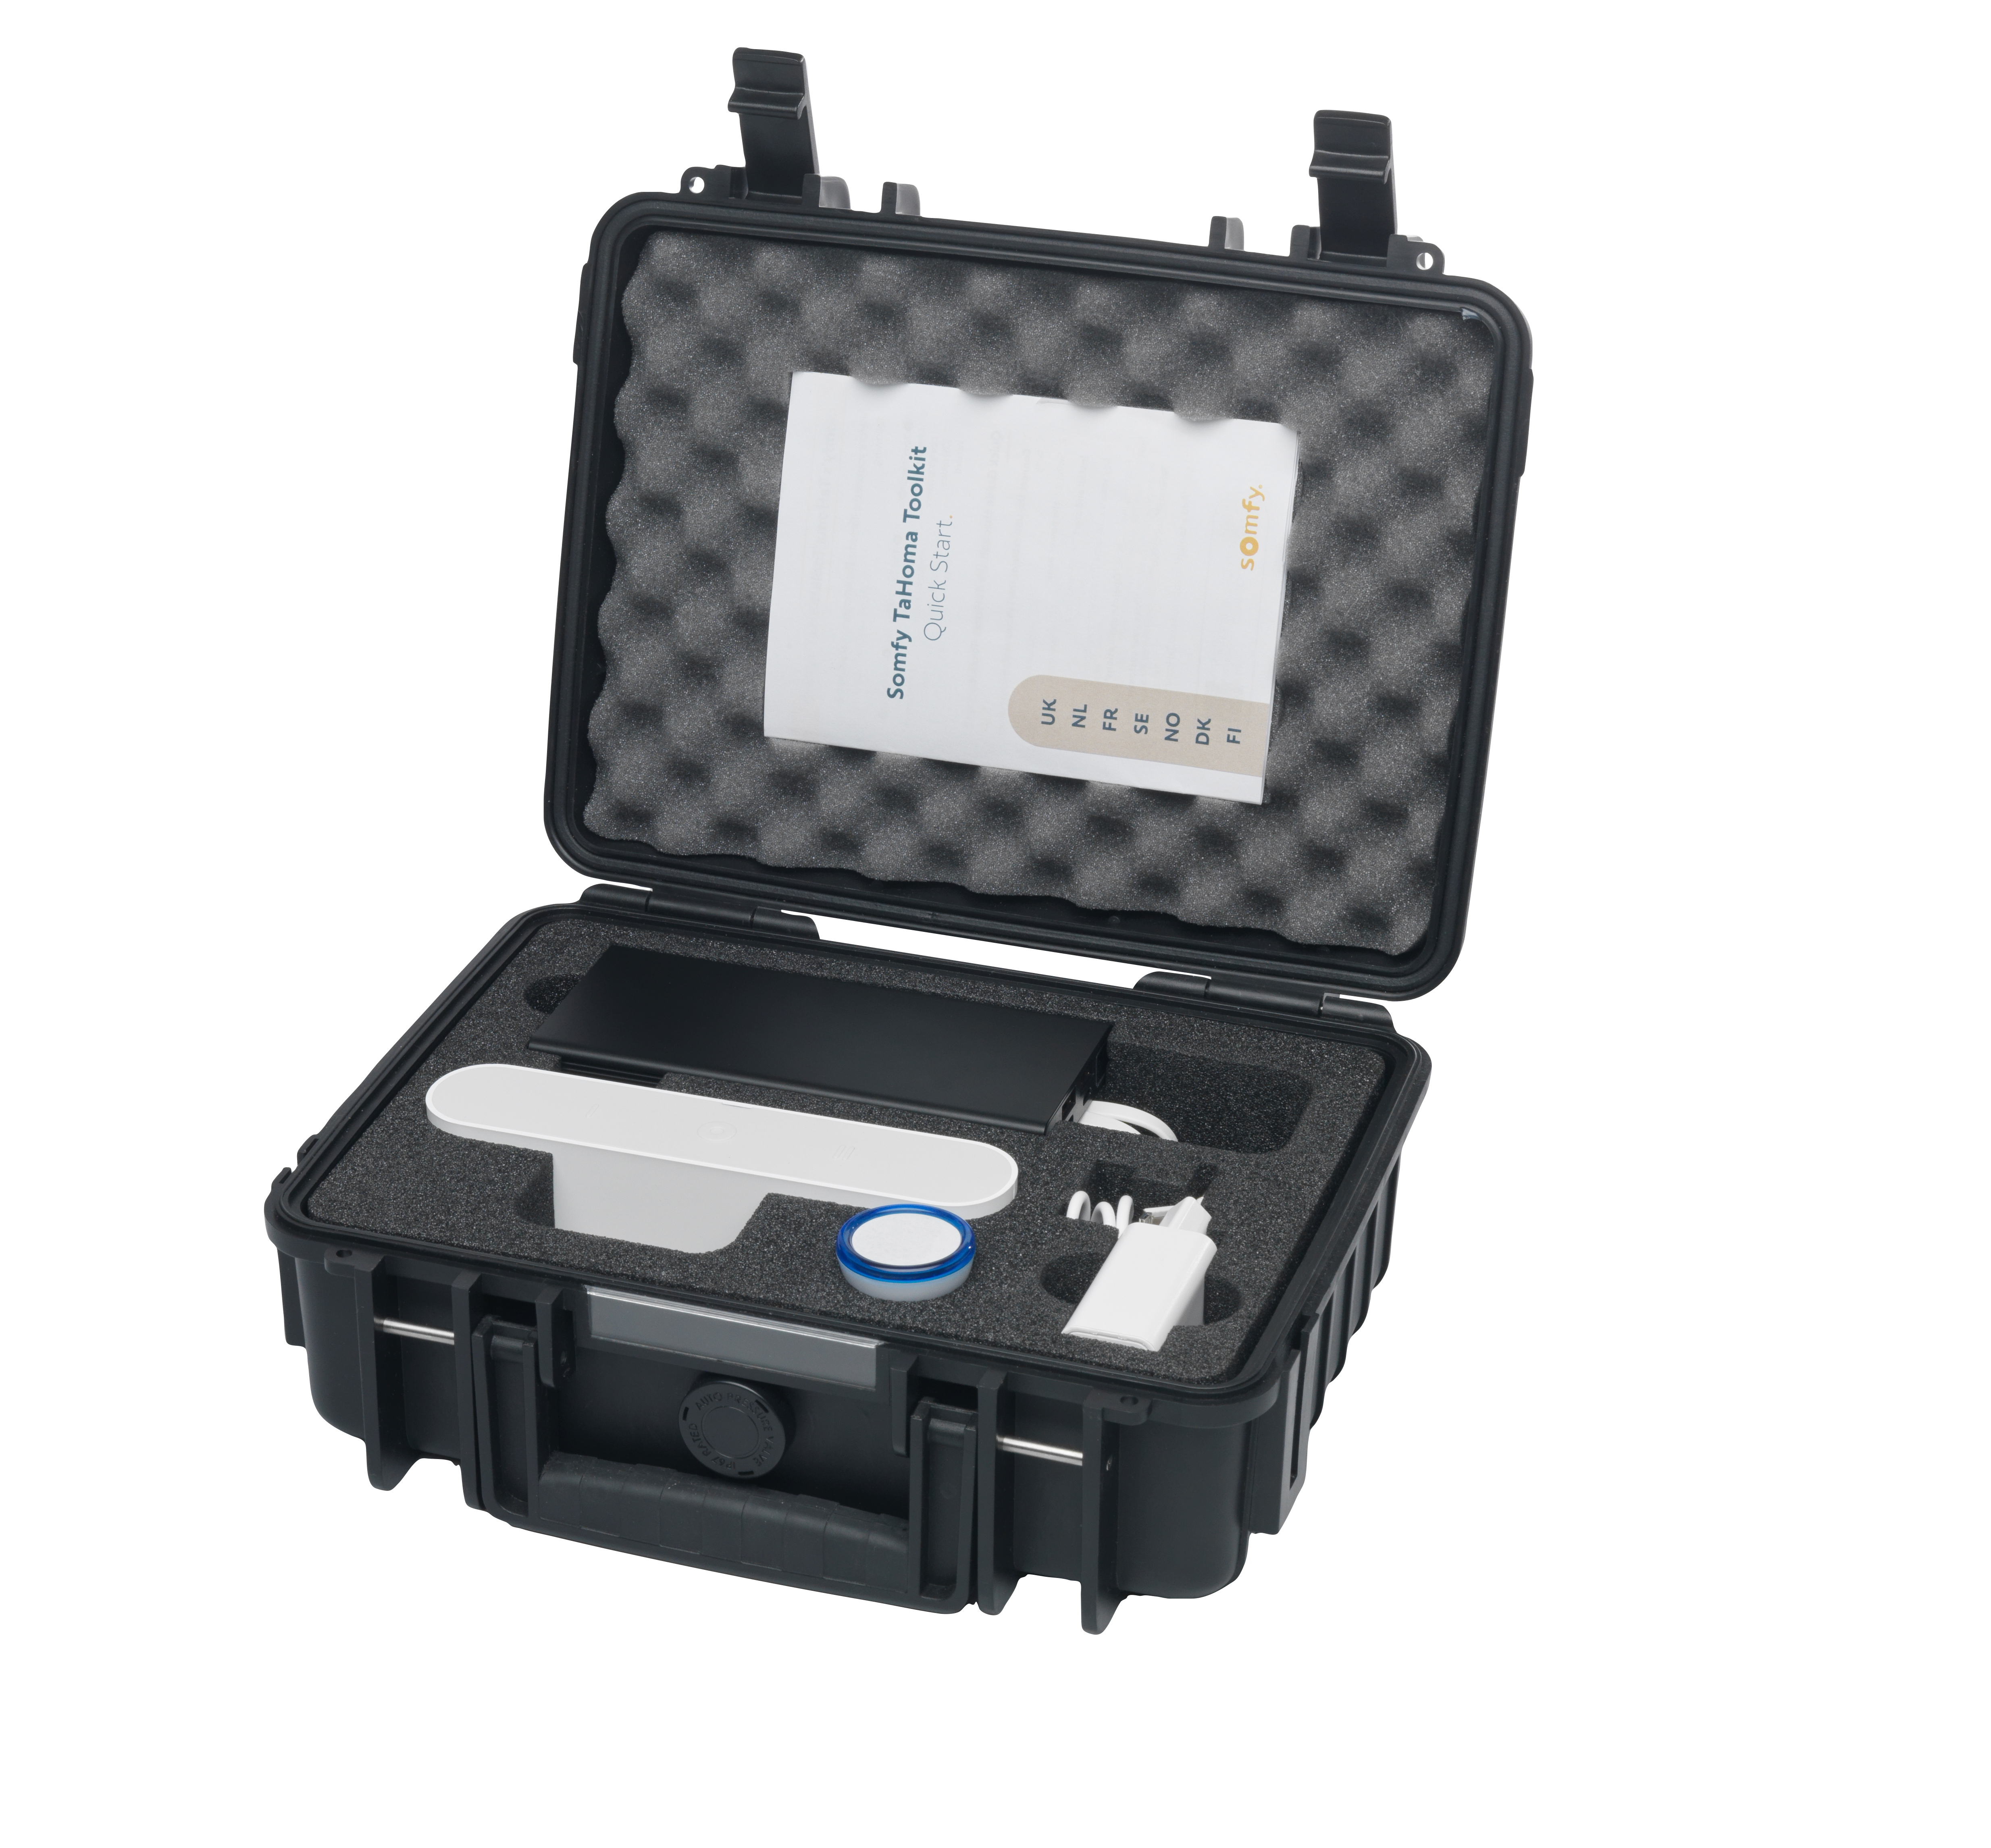 Somfy TaHoma Toolkit for installing and commissioning Somfy products